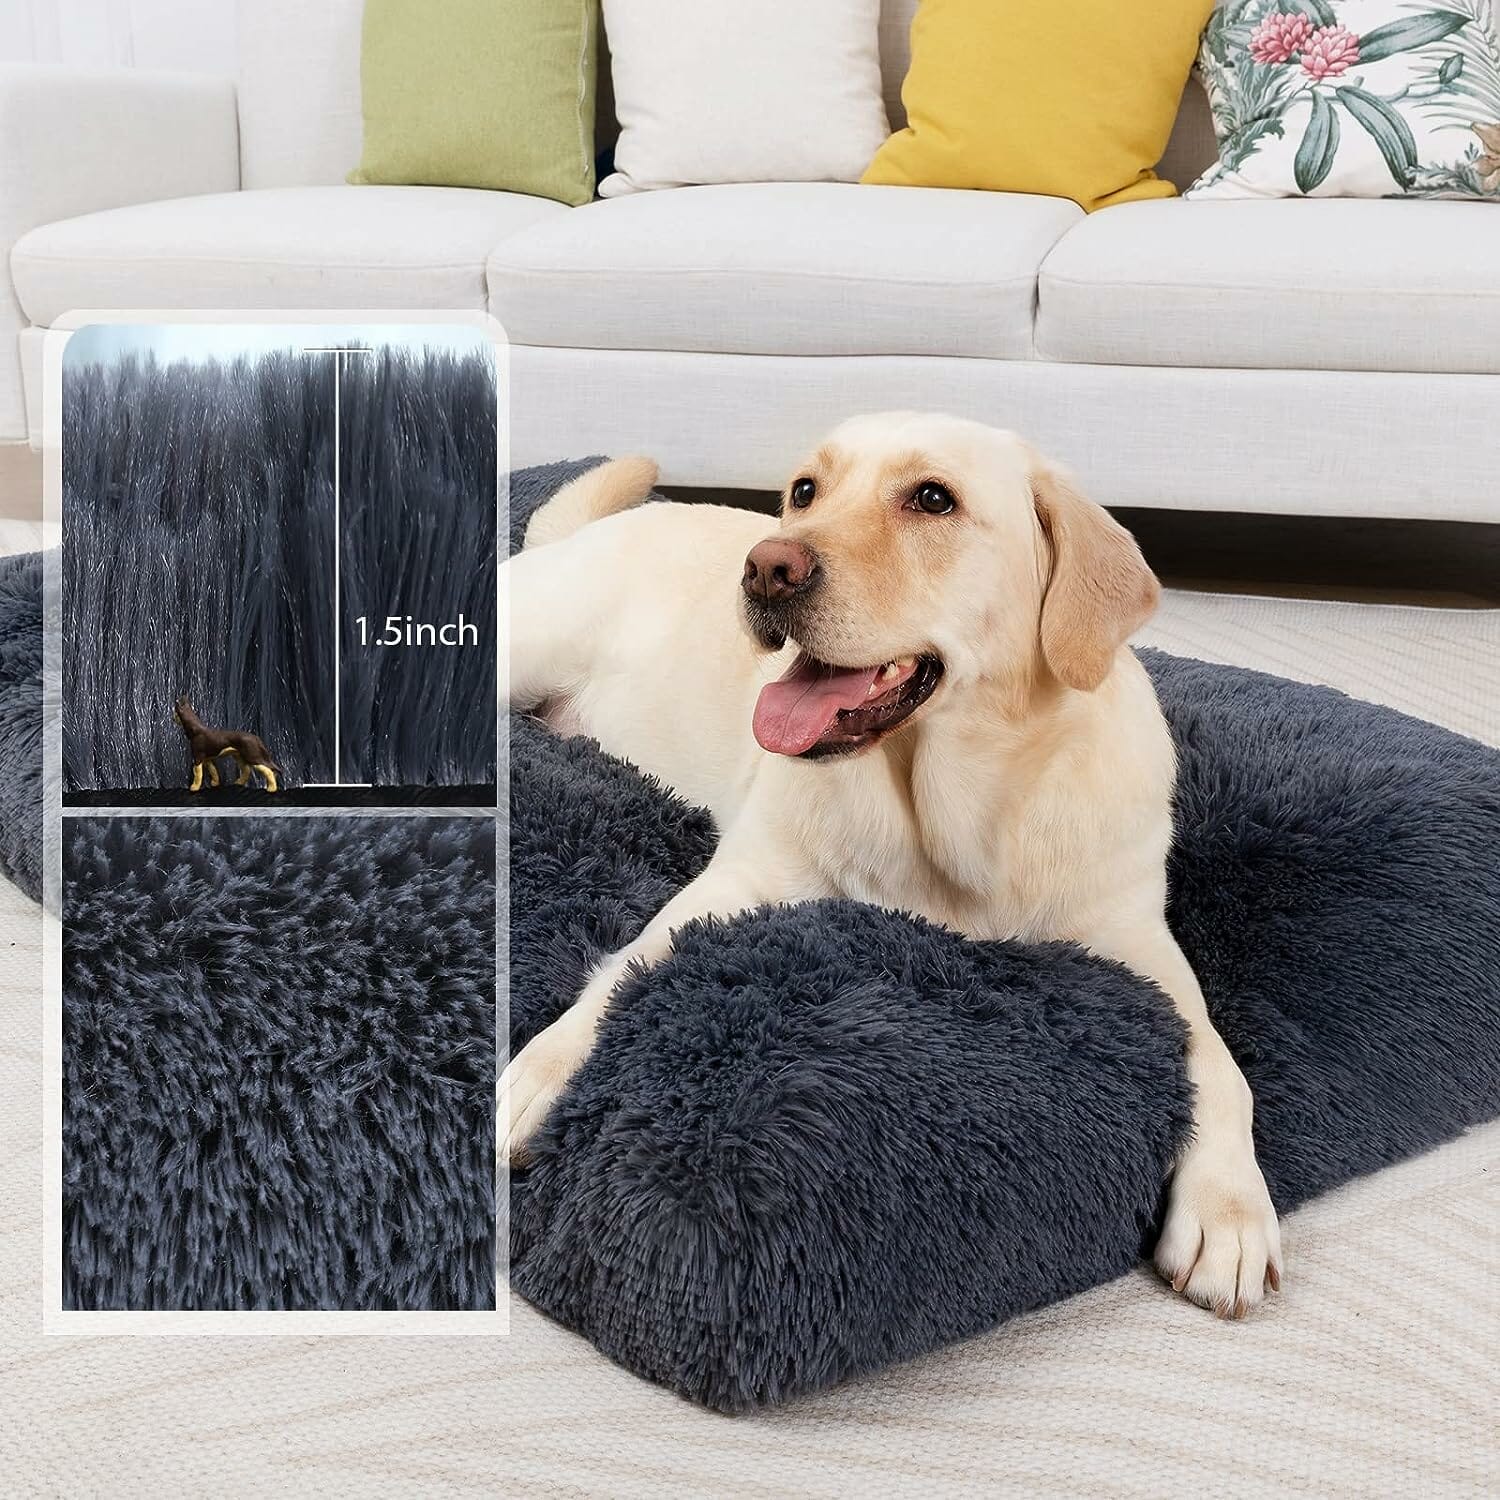 CHAMPETS Washable Dog Bed Review – The Ultimate Comfort for Your Pup?